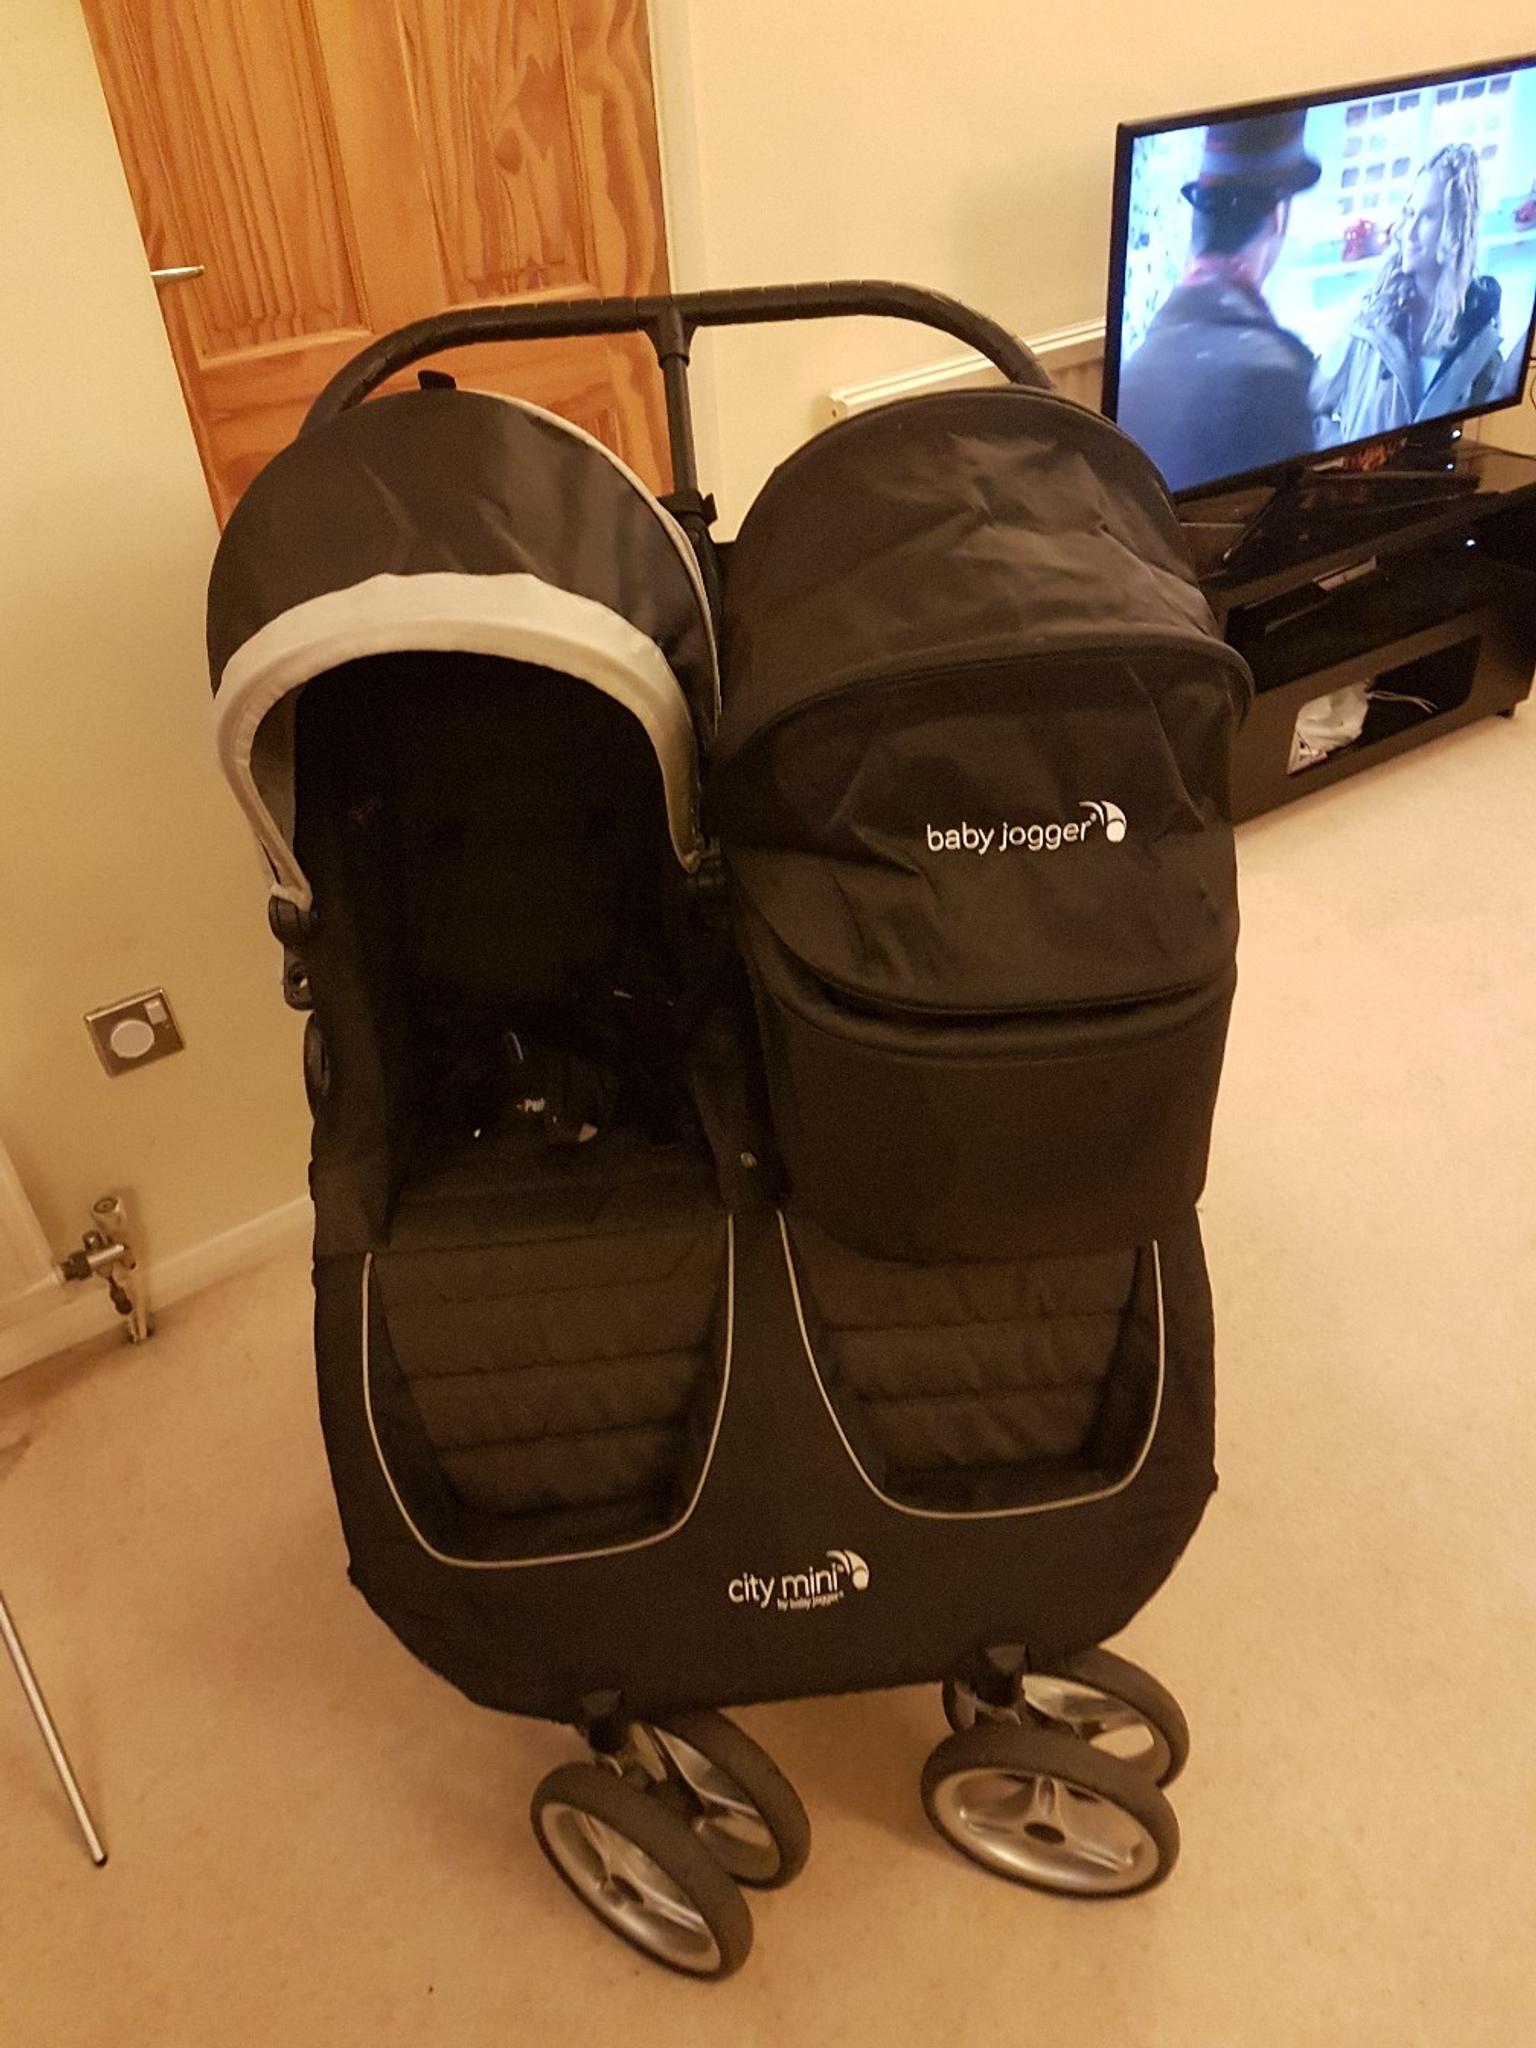 city mini double stroller carrycot